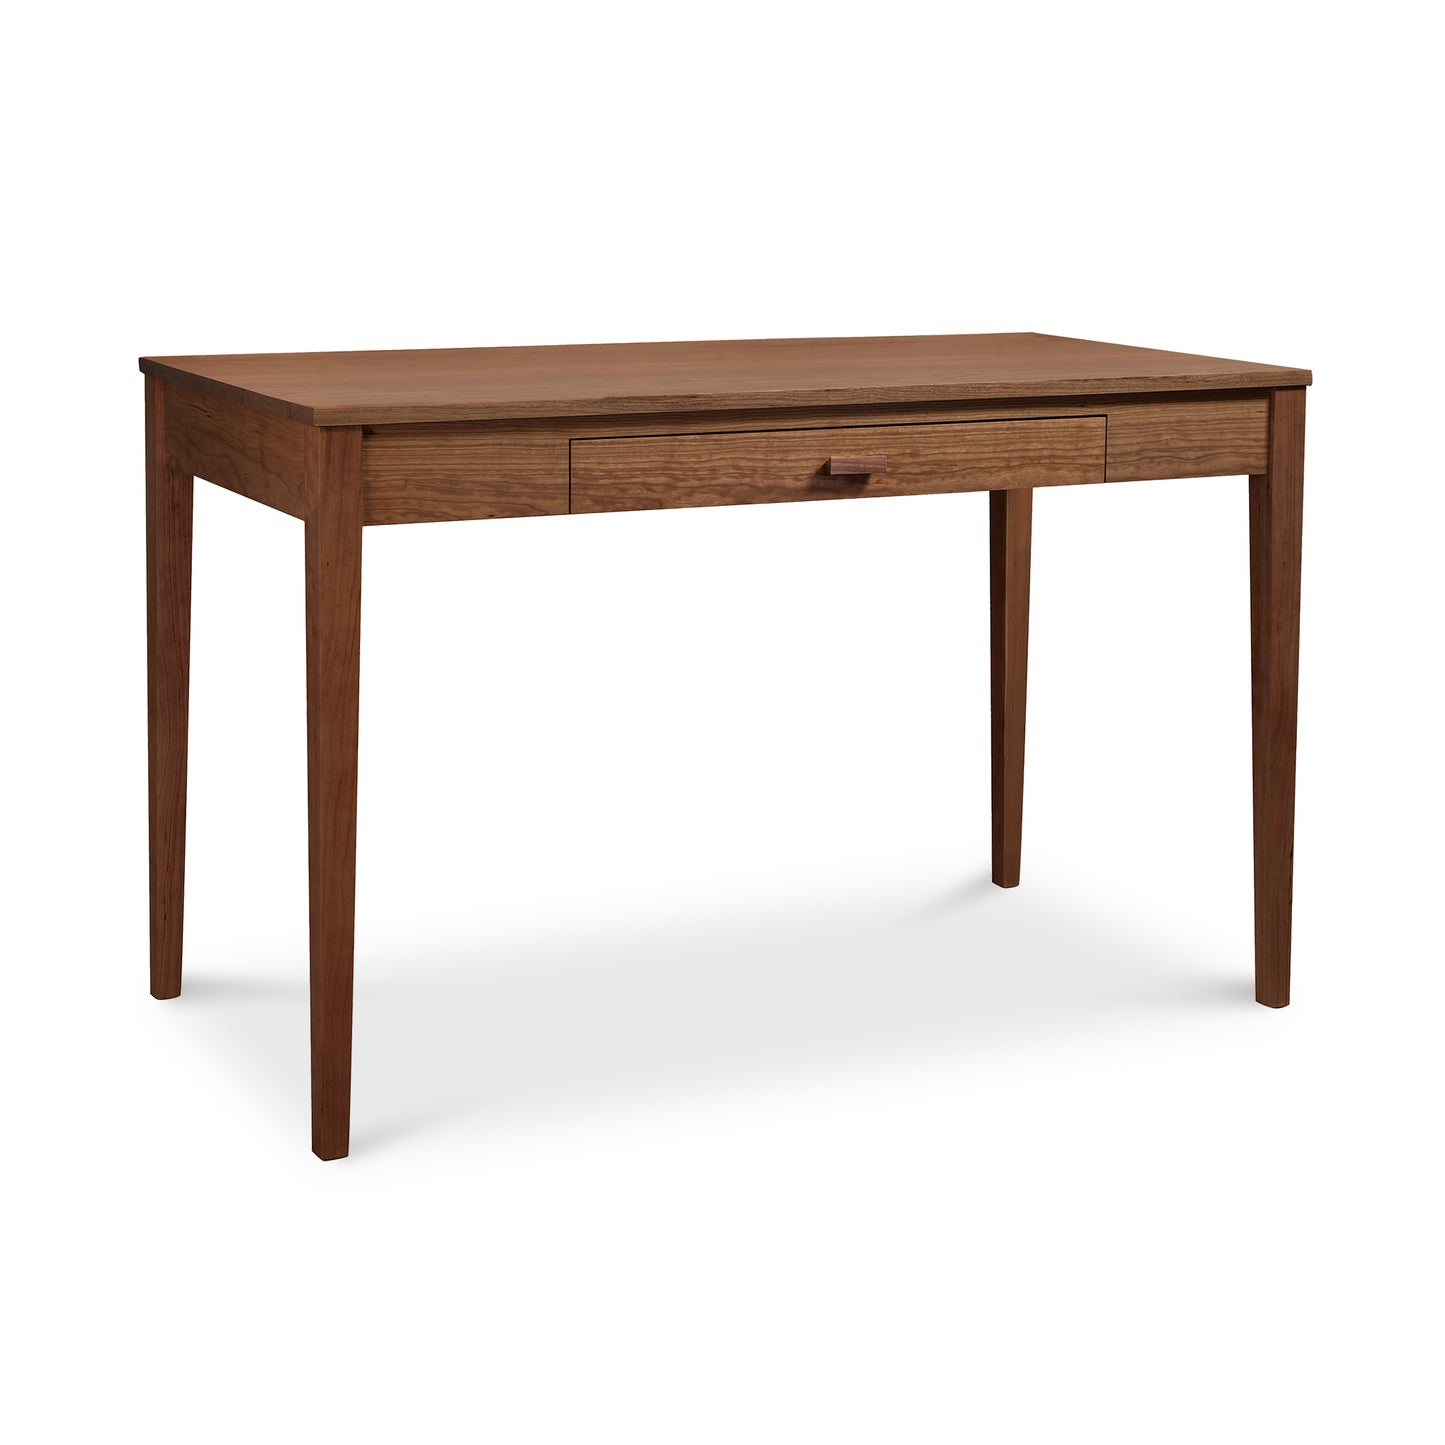 An image of a Maple Corner Woodworks Andover Modern Writing Desk with drawers in a contemporary style.